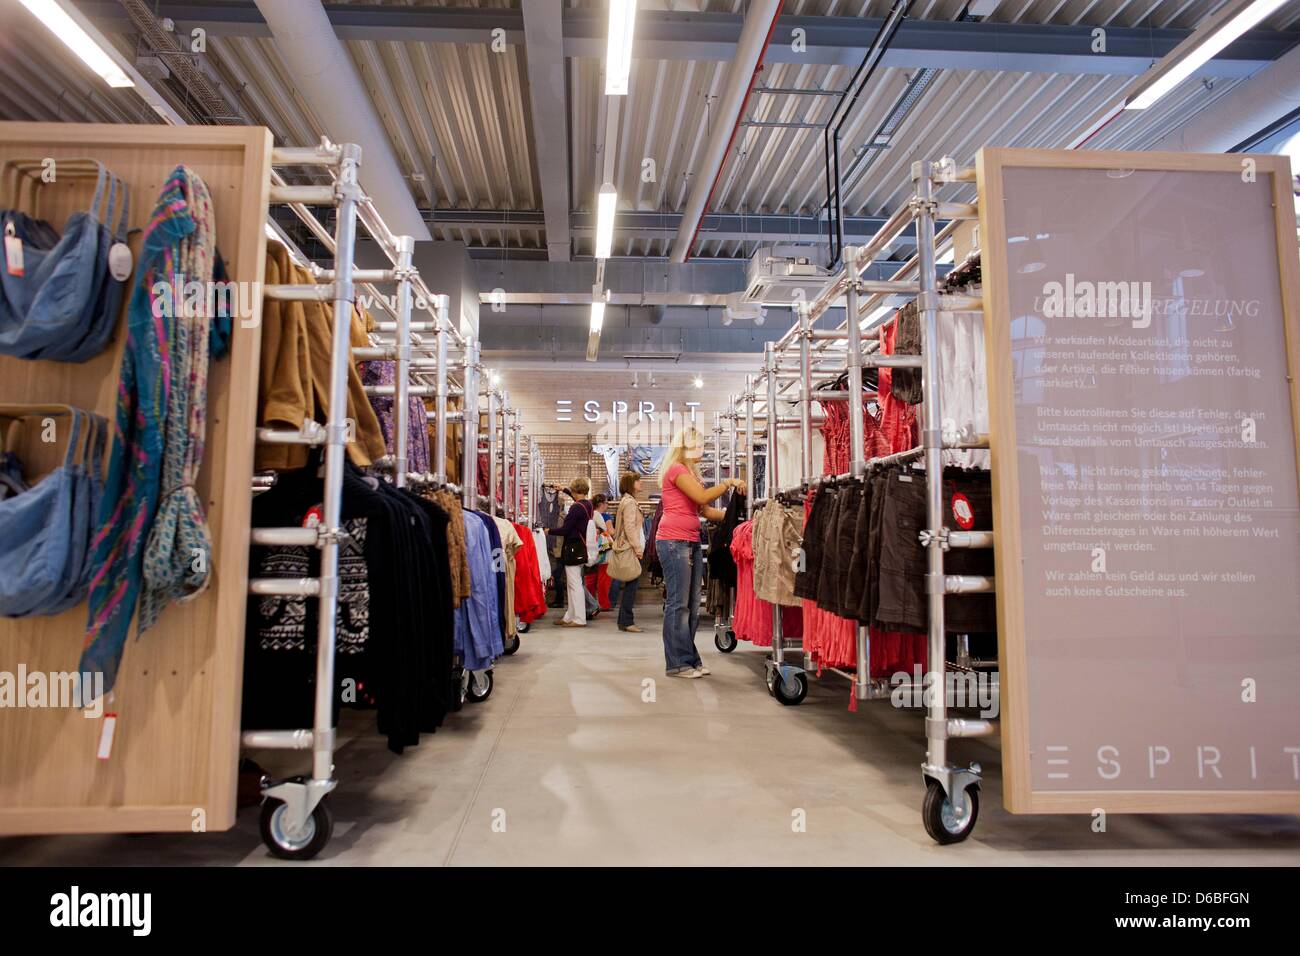 Foc Shop High Resolution Stock Photography and Images - Alamy